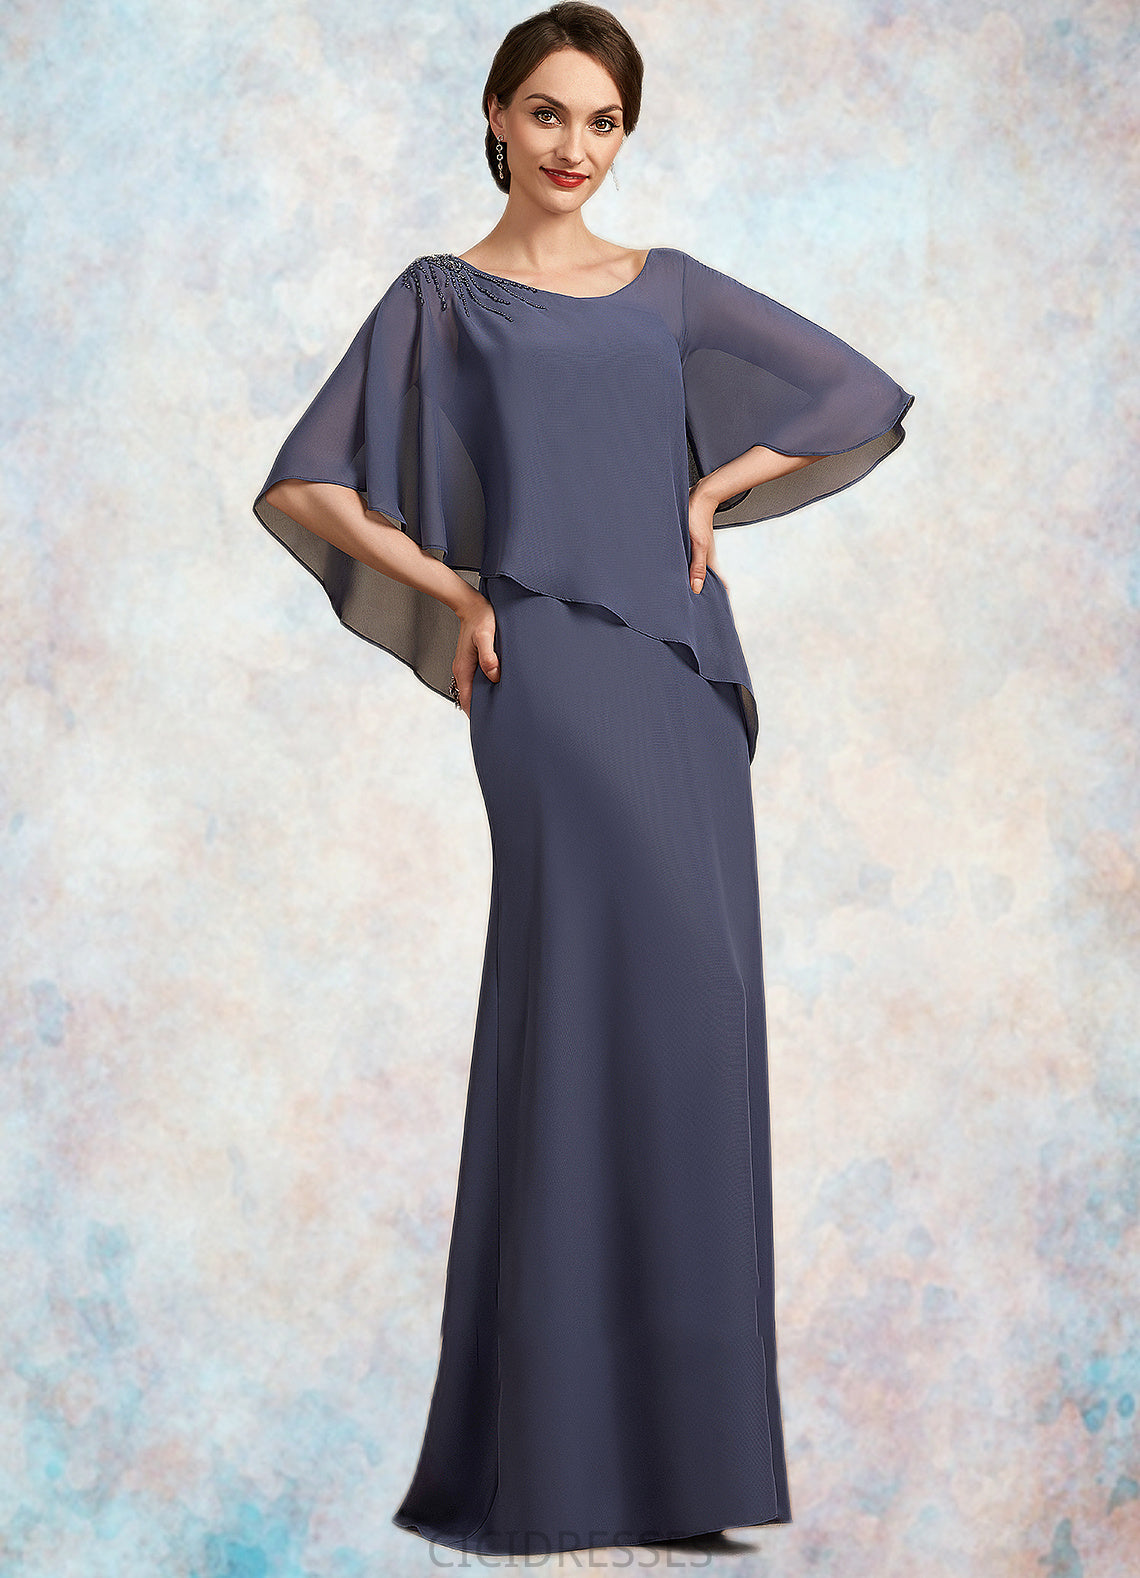 Abbie A-Line Scoop Neck Floor-Length Chiffon Mother of the Bride Dress With Beading CIC8126P0014793